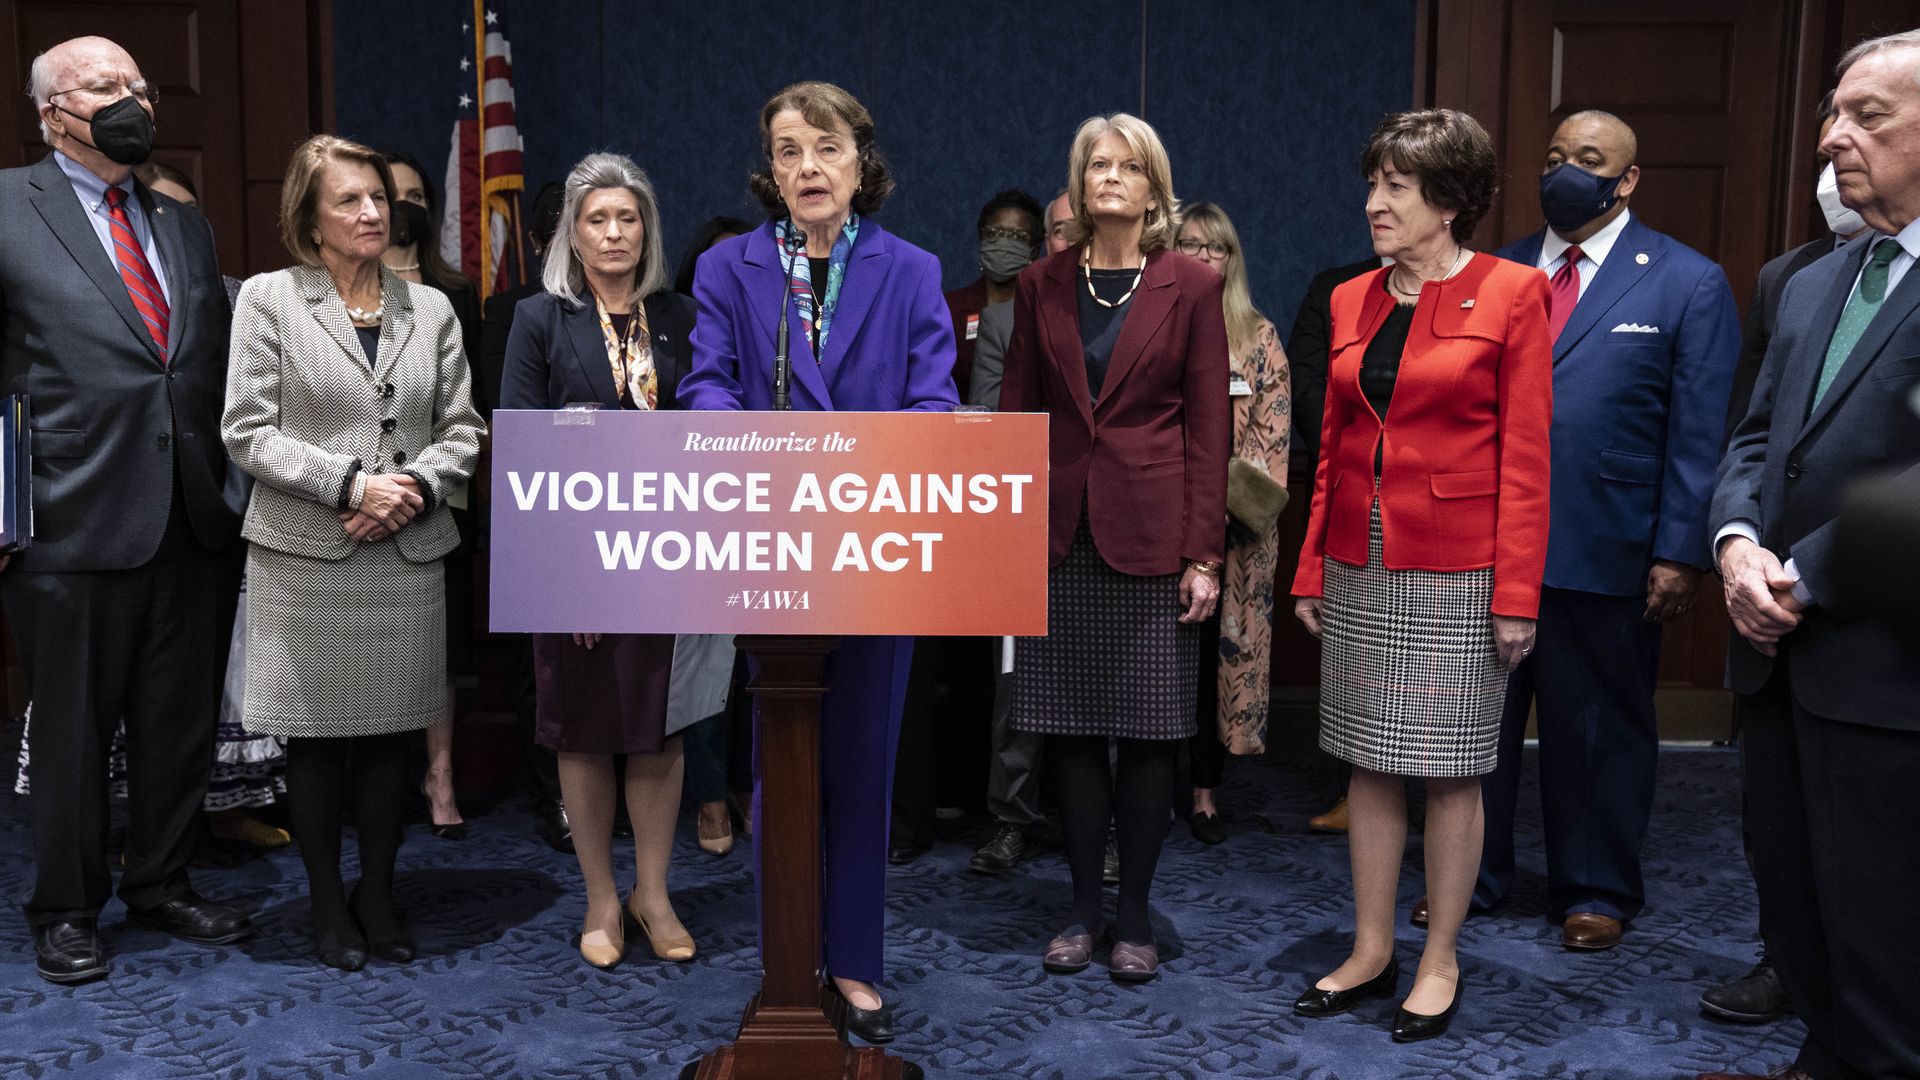  Senator Dianne Feinstein, a Democrat from California, speaks during a news conference on the bipartisan modernized Violence Against Women Act (VAWA) at the U.S. Capitol in Washington, D.C., U.S., on Wednesday, Feb. 9, 2022.